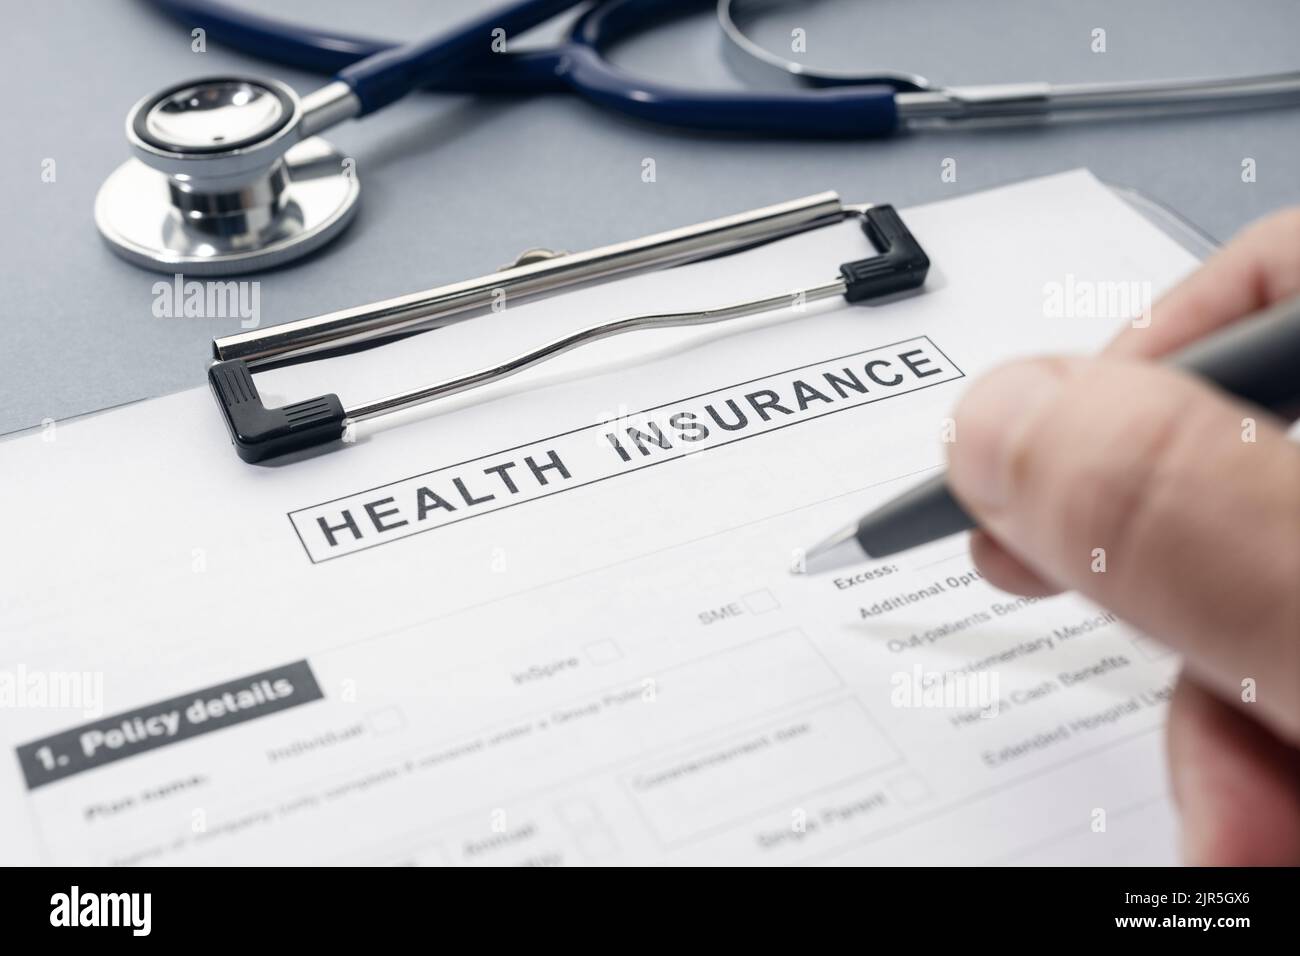 Hand writing on Health Insurance form and stethoscope on desk Stock Photo